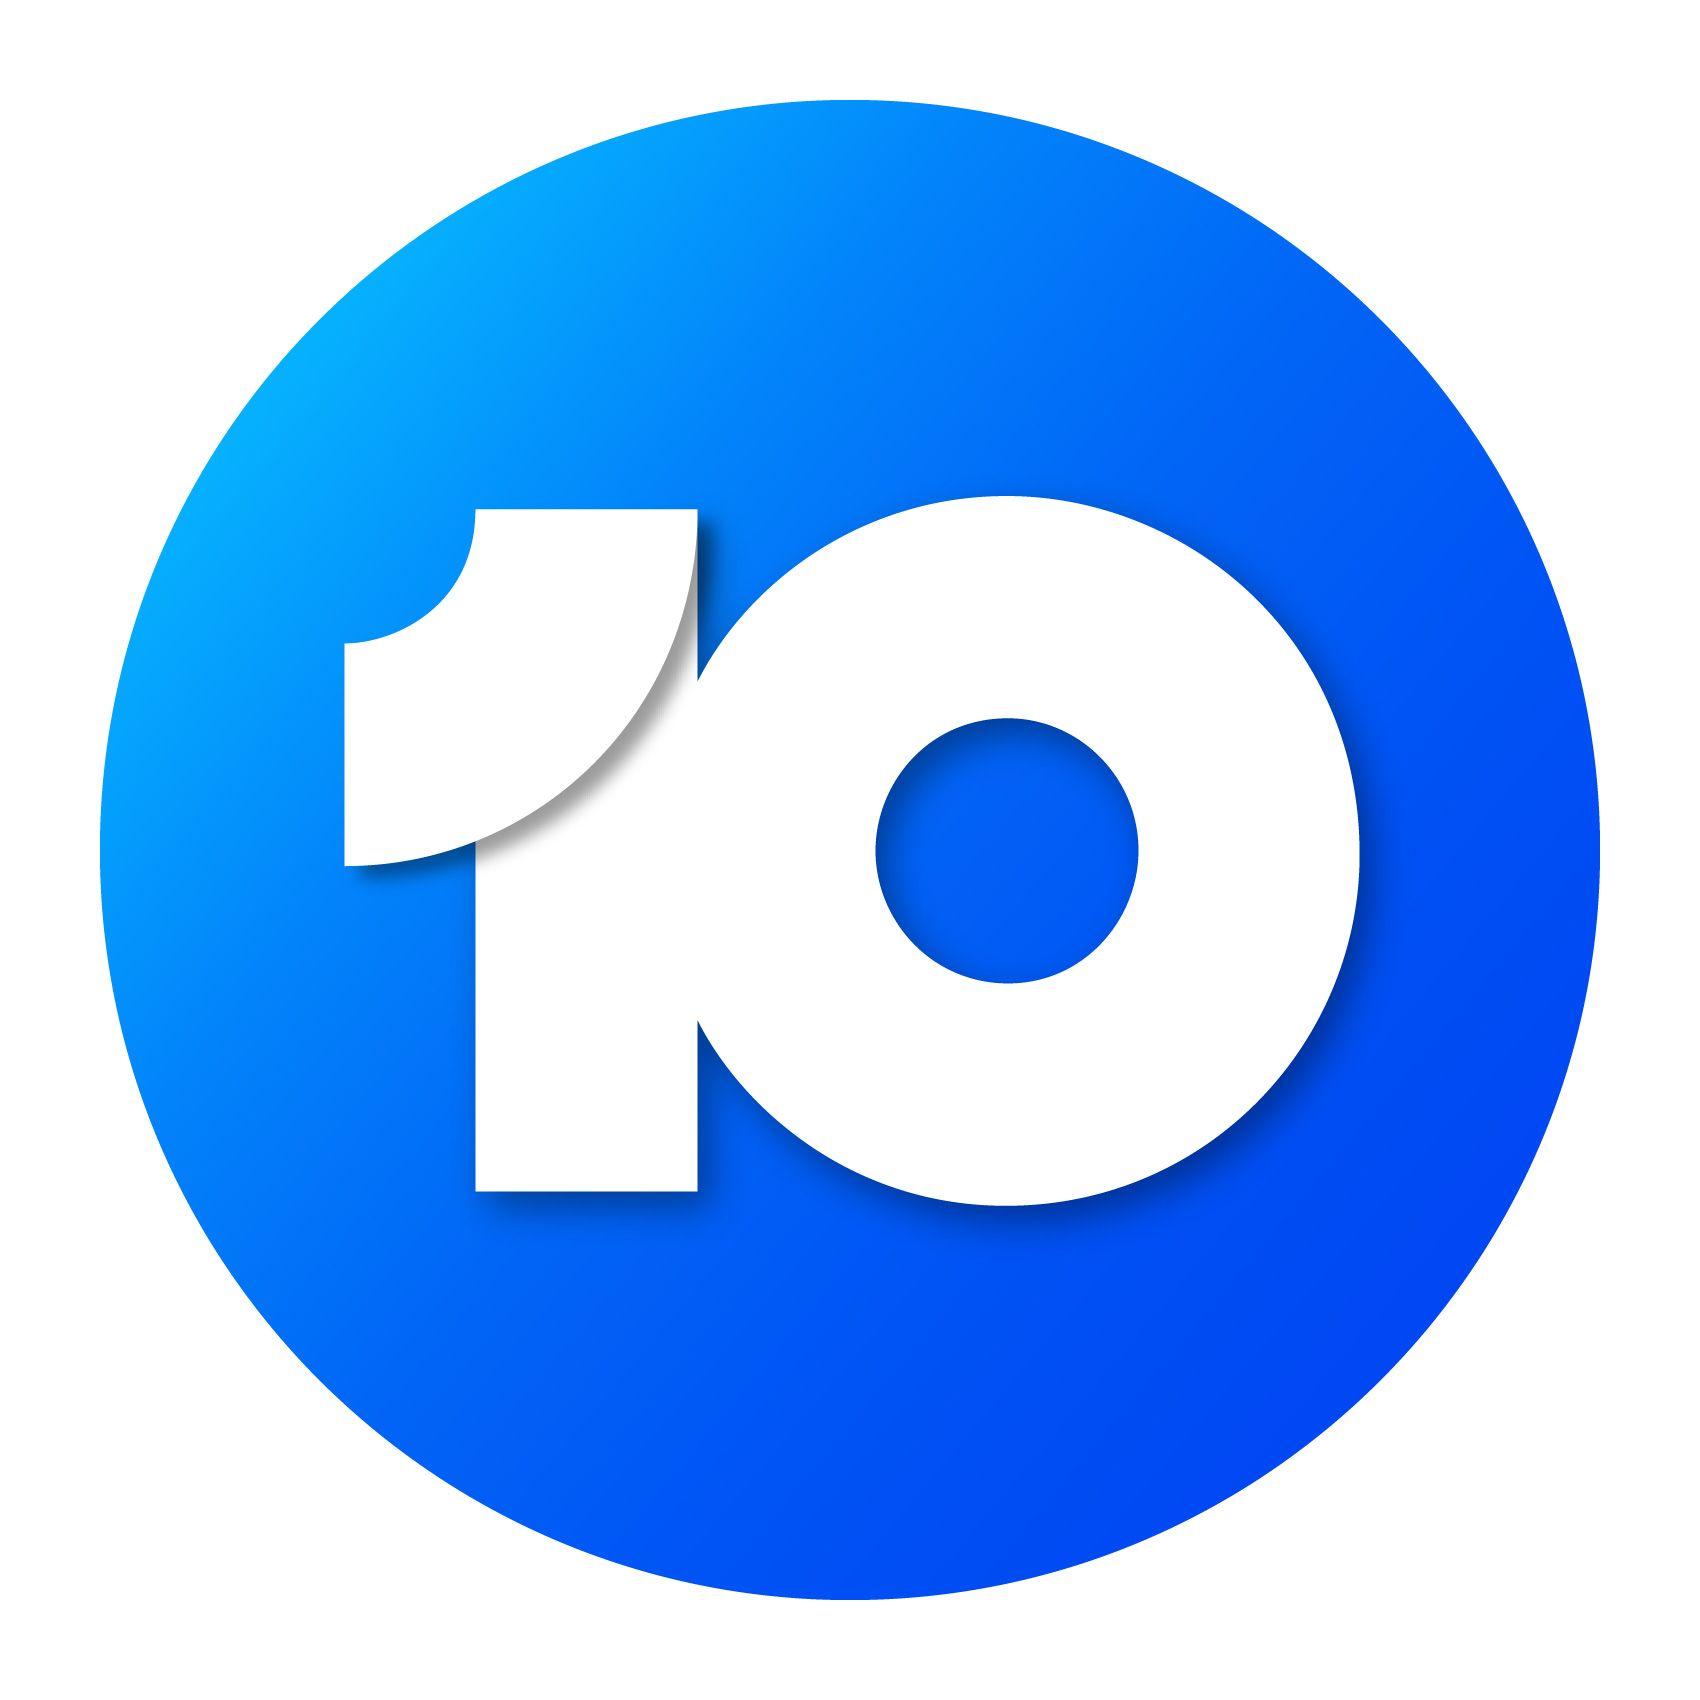 Circle 7 Logo - Brand New: New Logo and On-air Look for Network 10 by Principals and ...